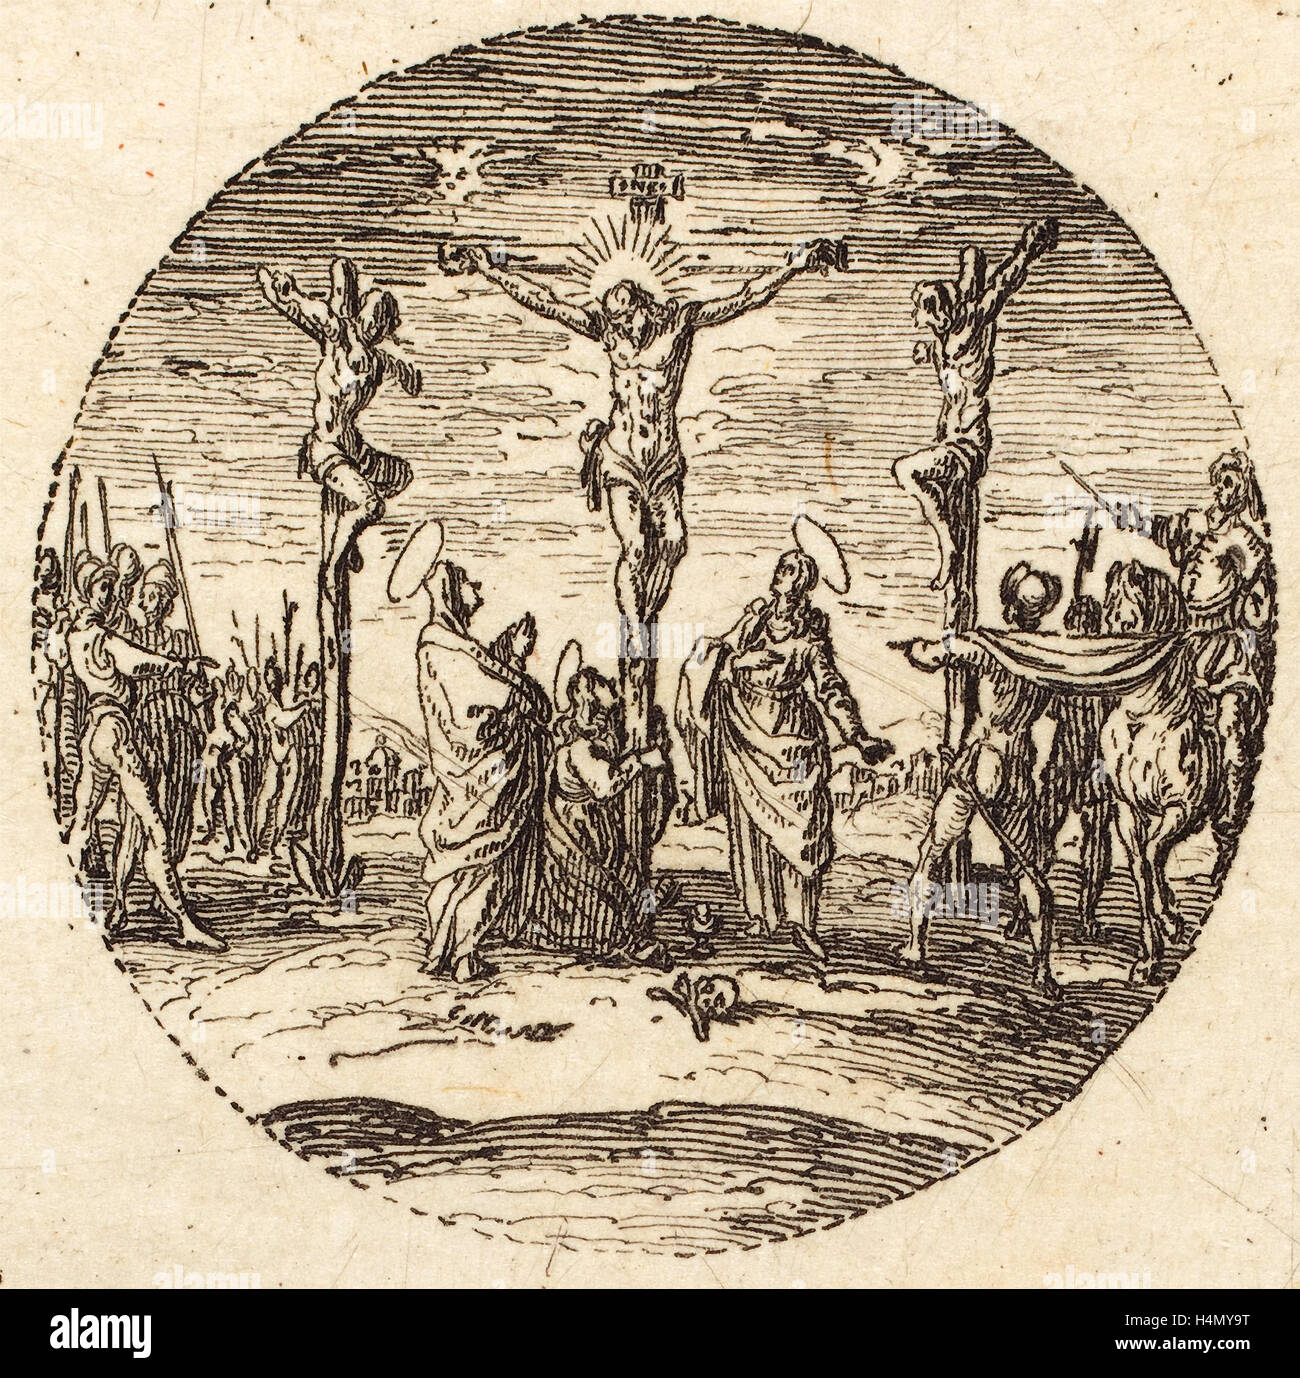 Jacques Callot (French, 1592 - 1635), The Crucifixion, c. 1631, etching Stock Photo